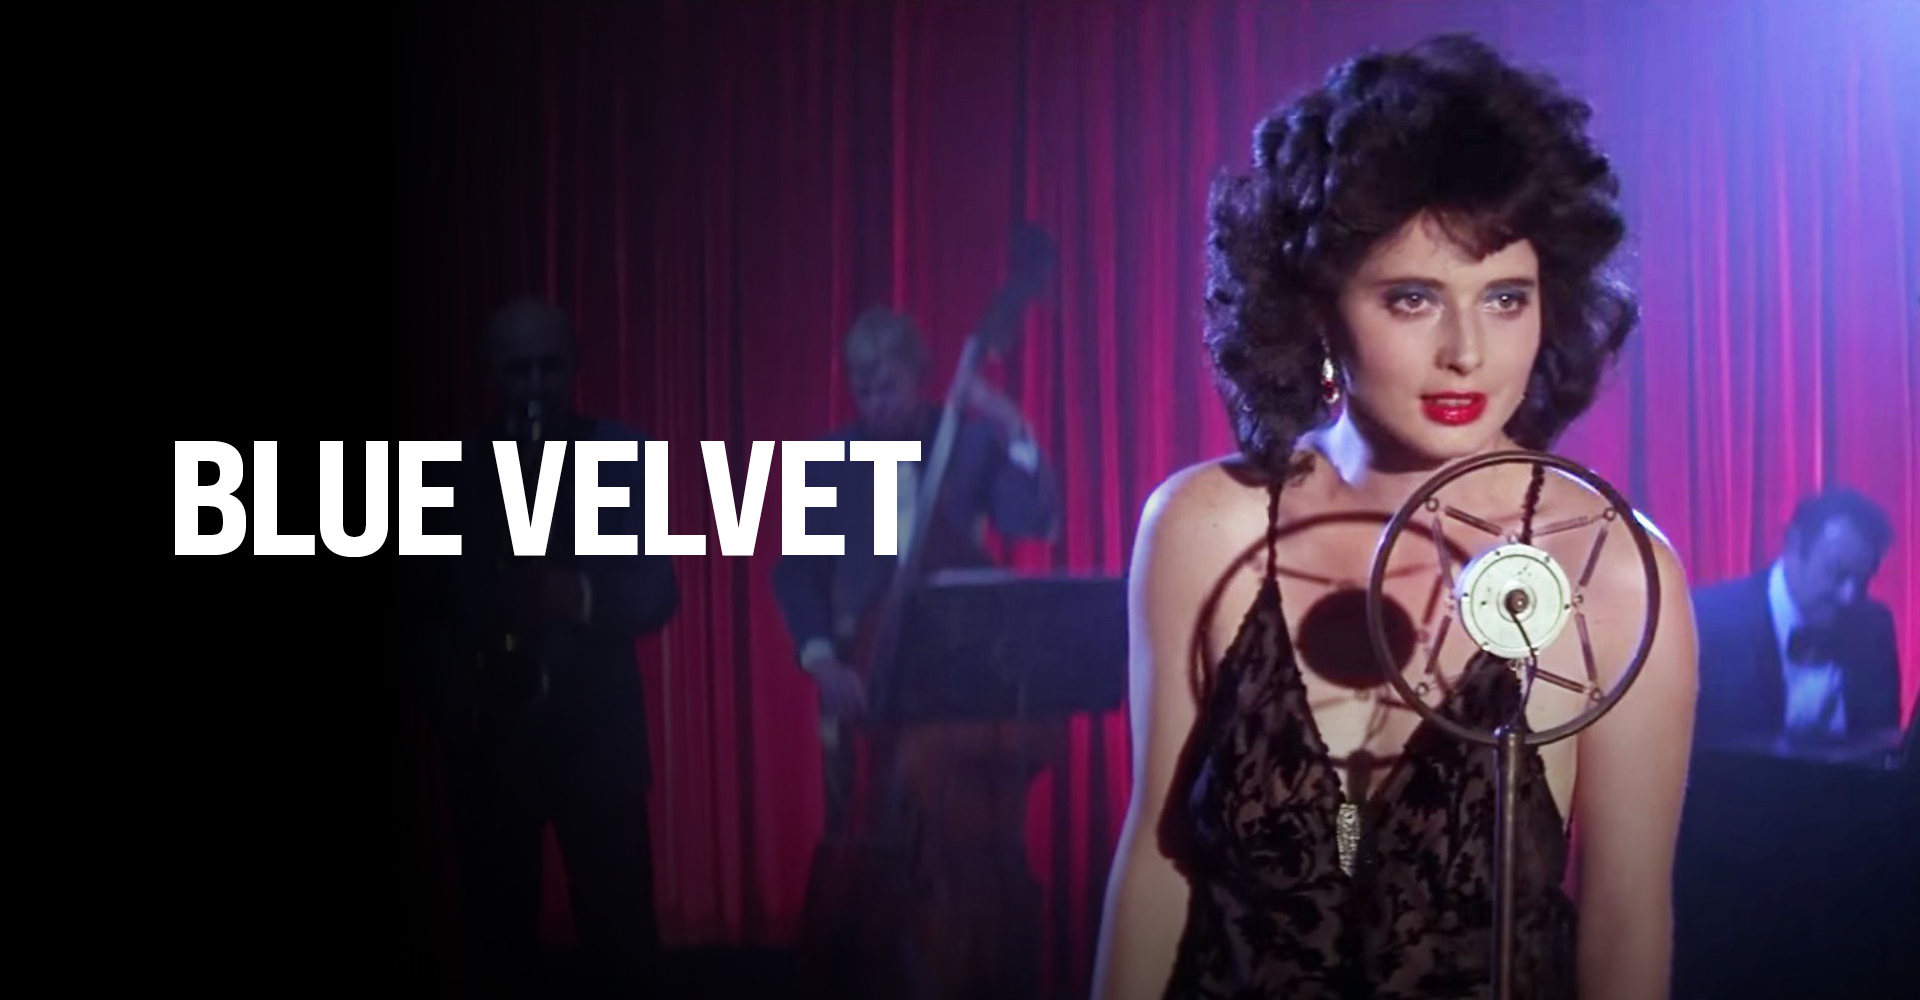 43 Facts about the movie Blue Velvet - Facts.net